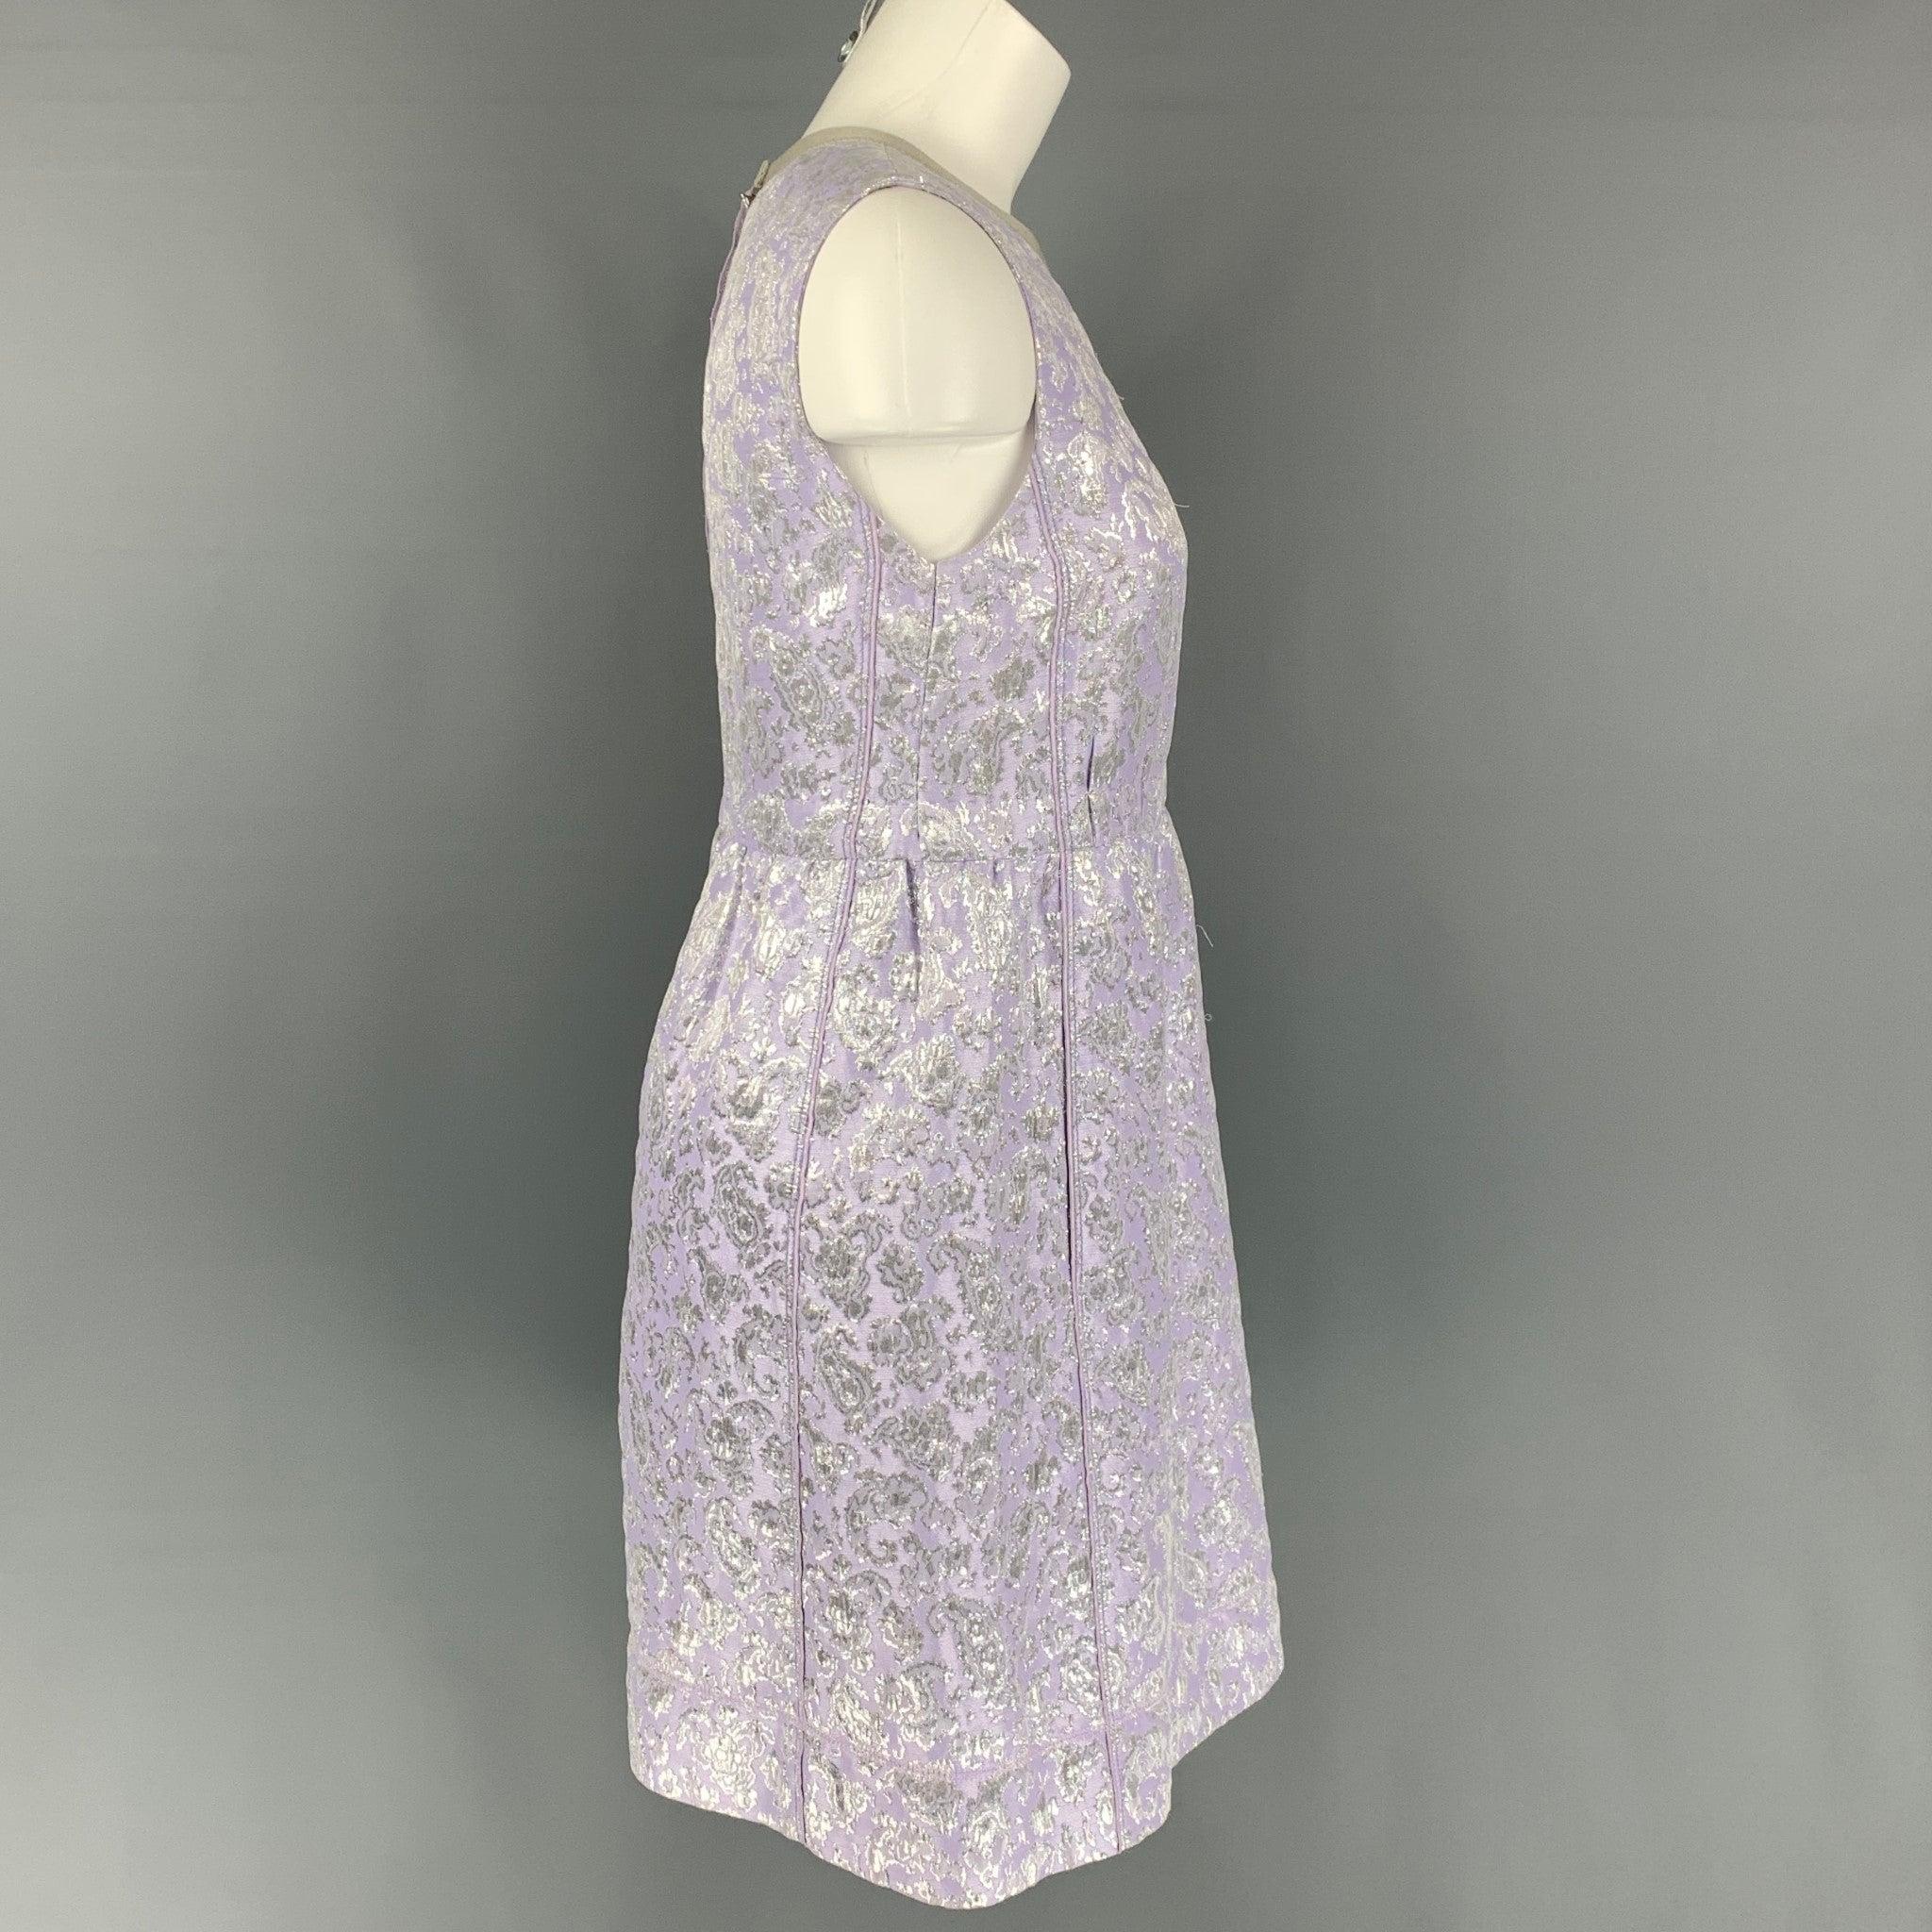 MARC JACOBS Size 6 Lavender & Silver Acetate Blend Jacquard Sheath Dress In Good Condition For Sale In San Francisco, CA